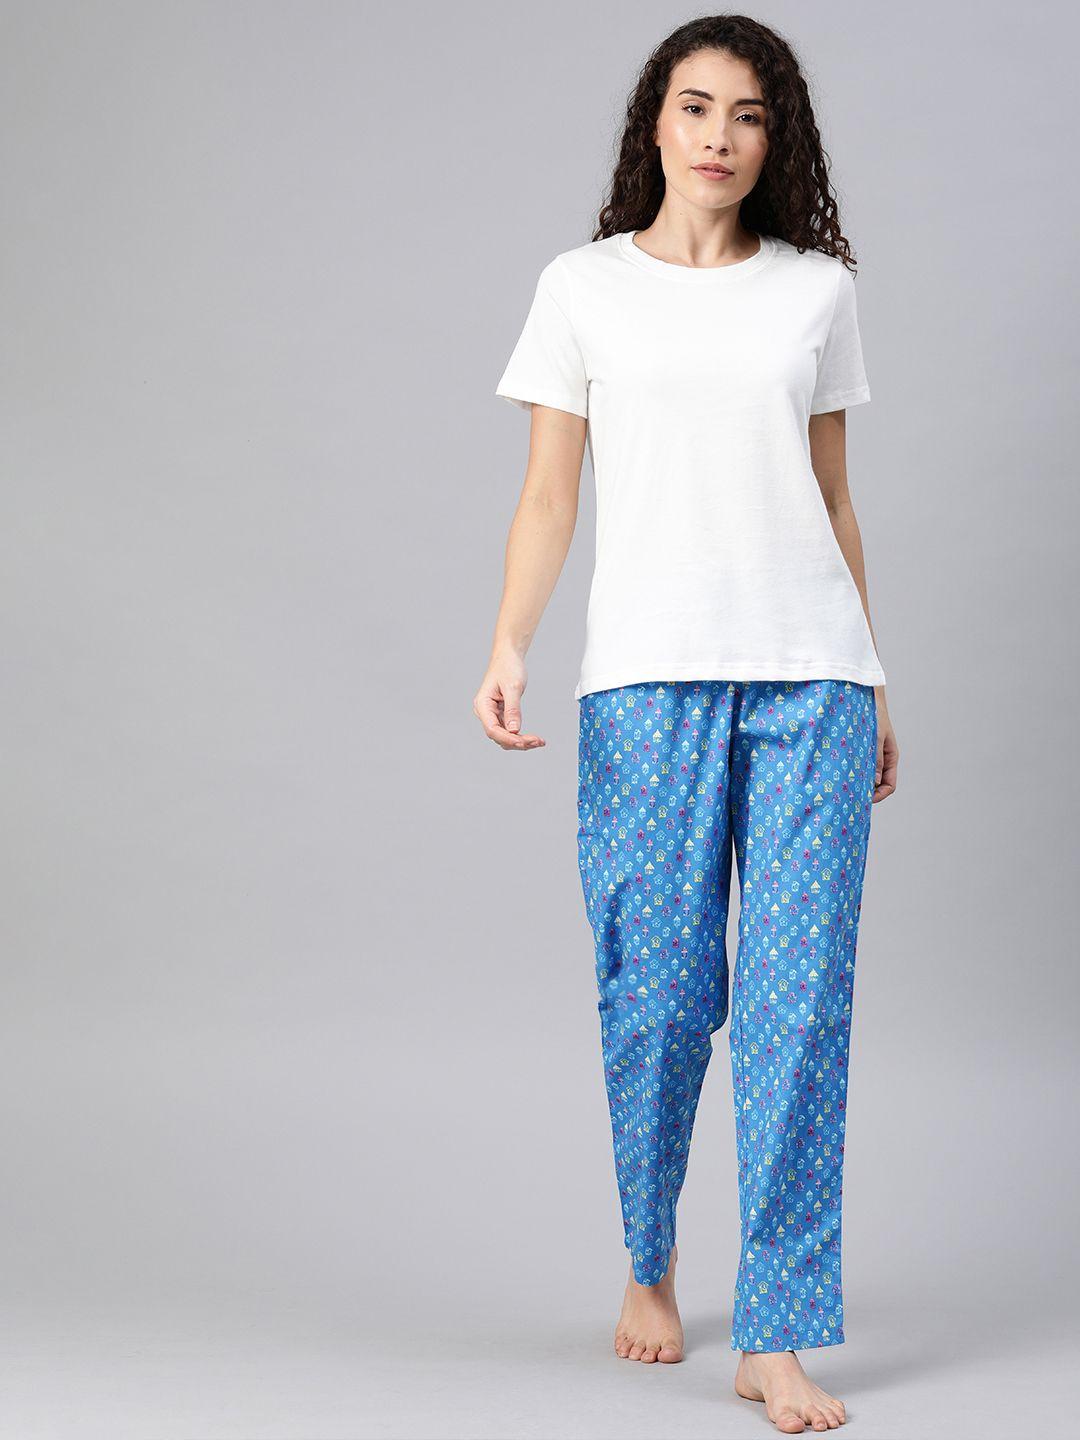 drape in vogue women white & blue solid night suit with conversational printed bottomwear